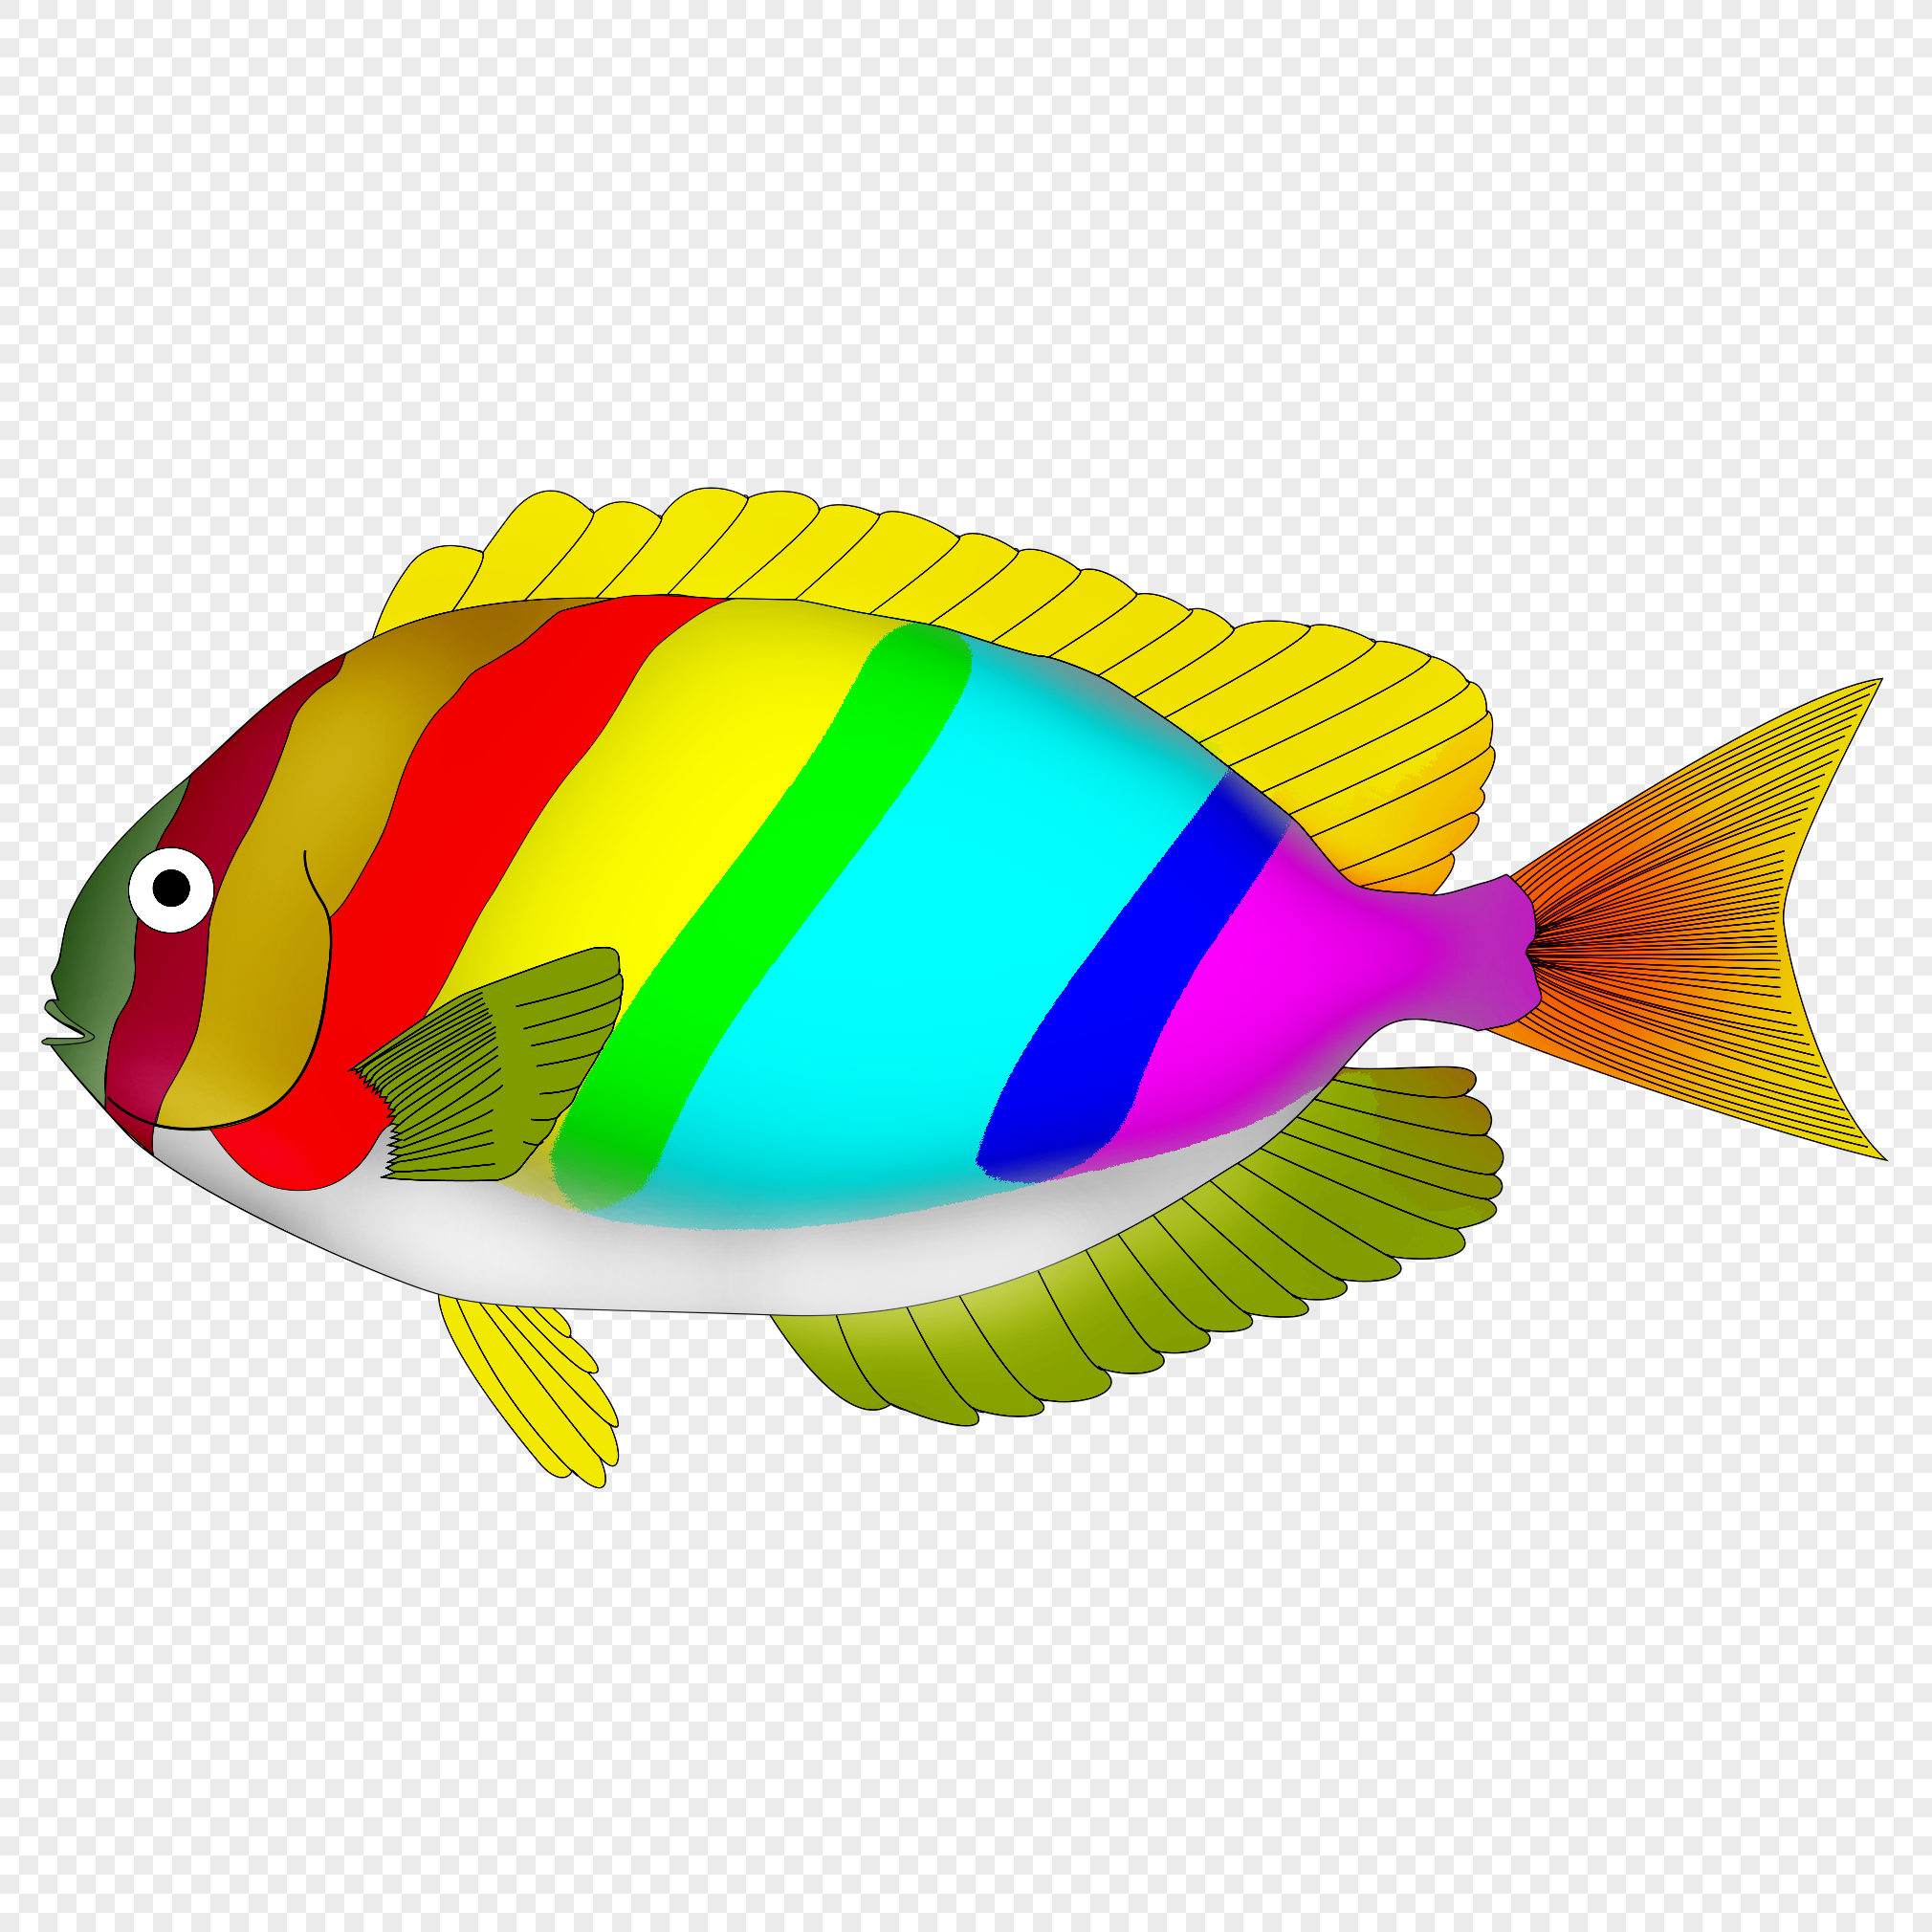 Colorful Images Of Fish